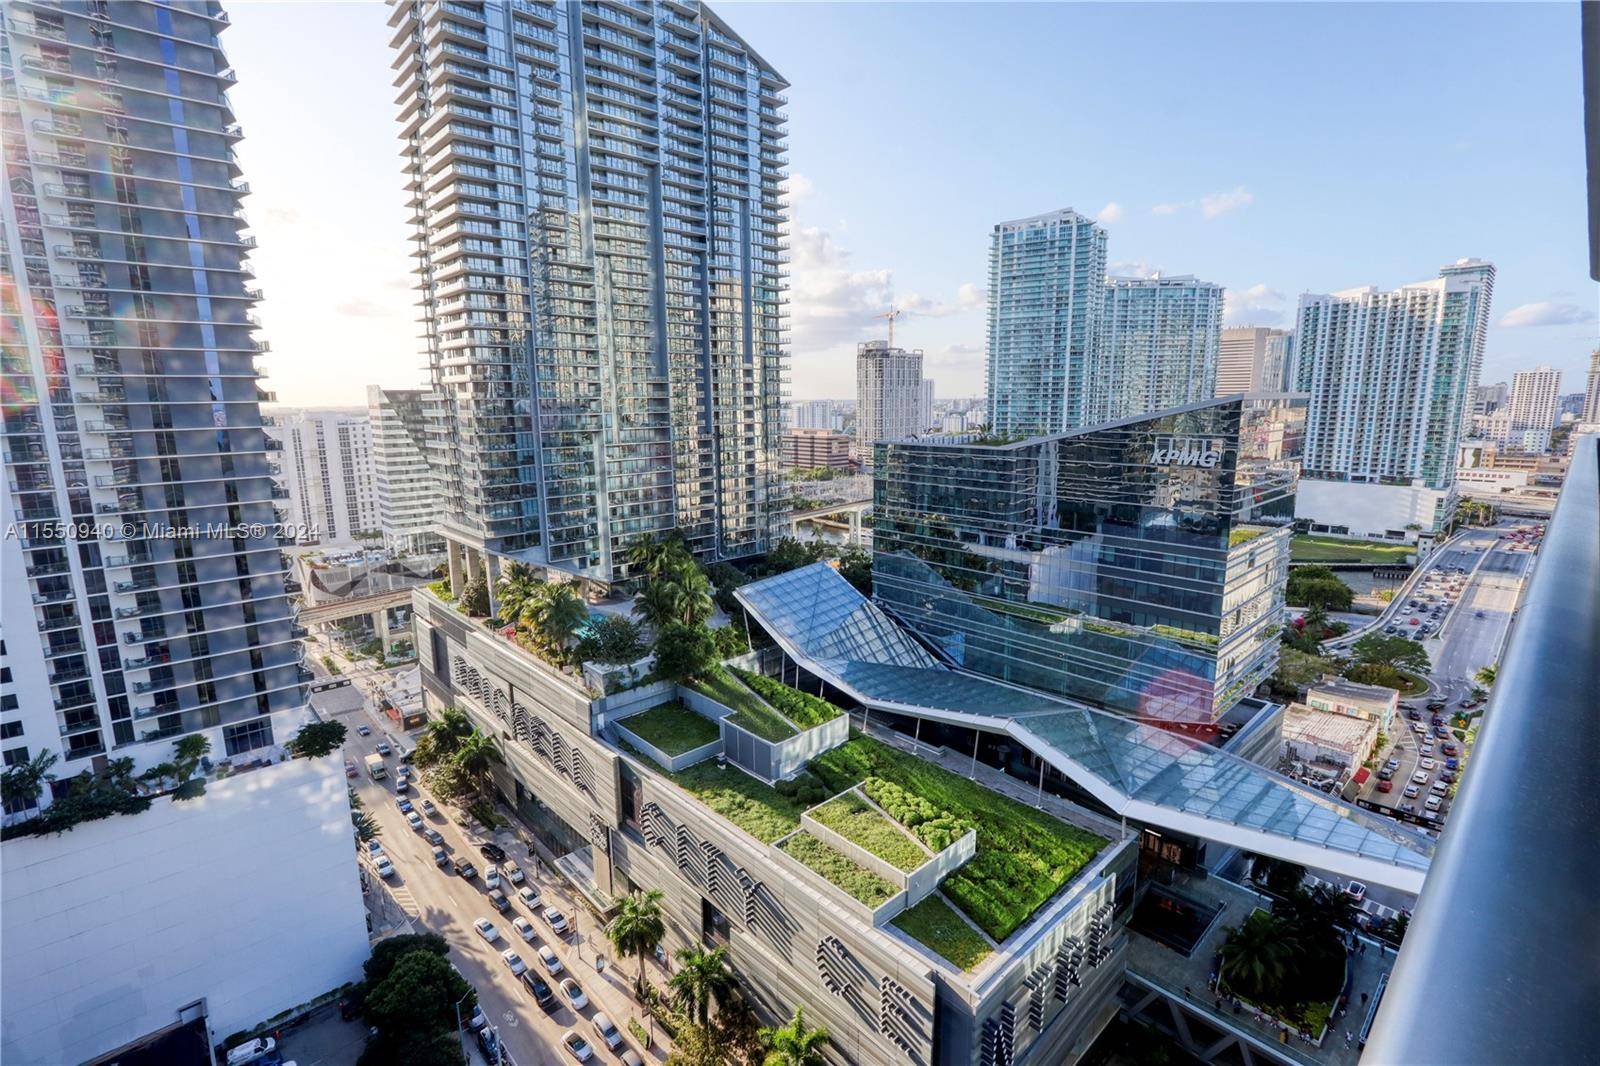 Introducing your dream condo in the heart of Brickell !